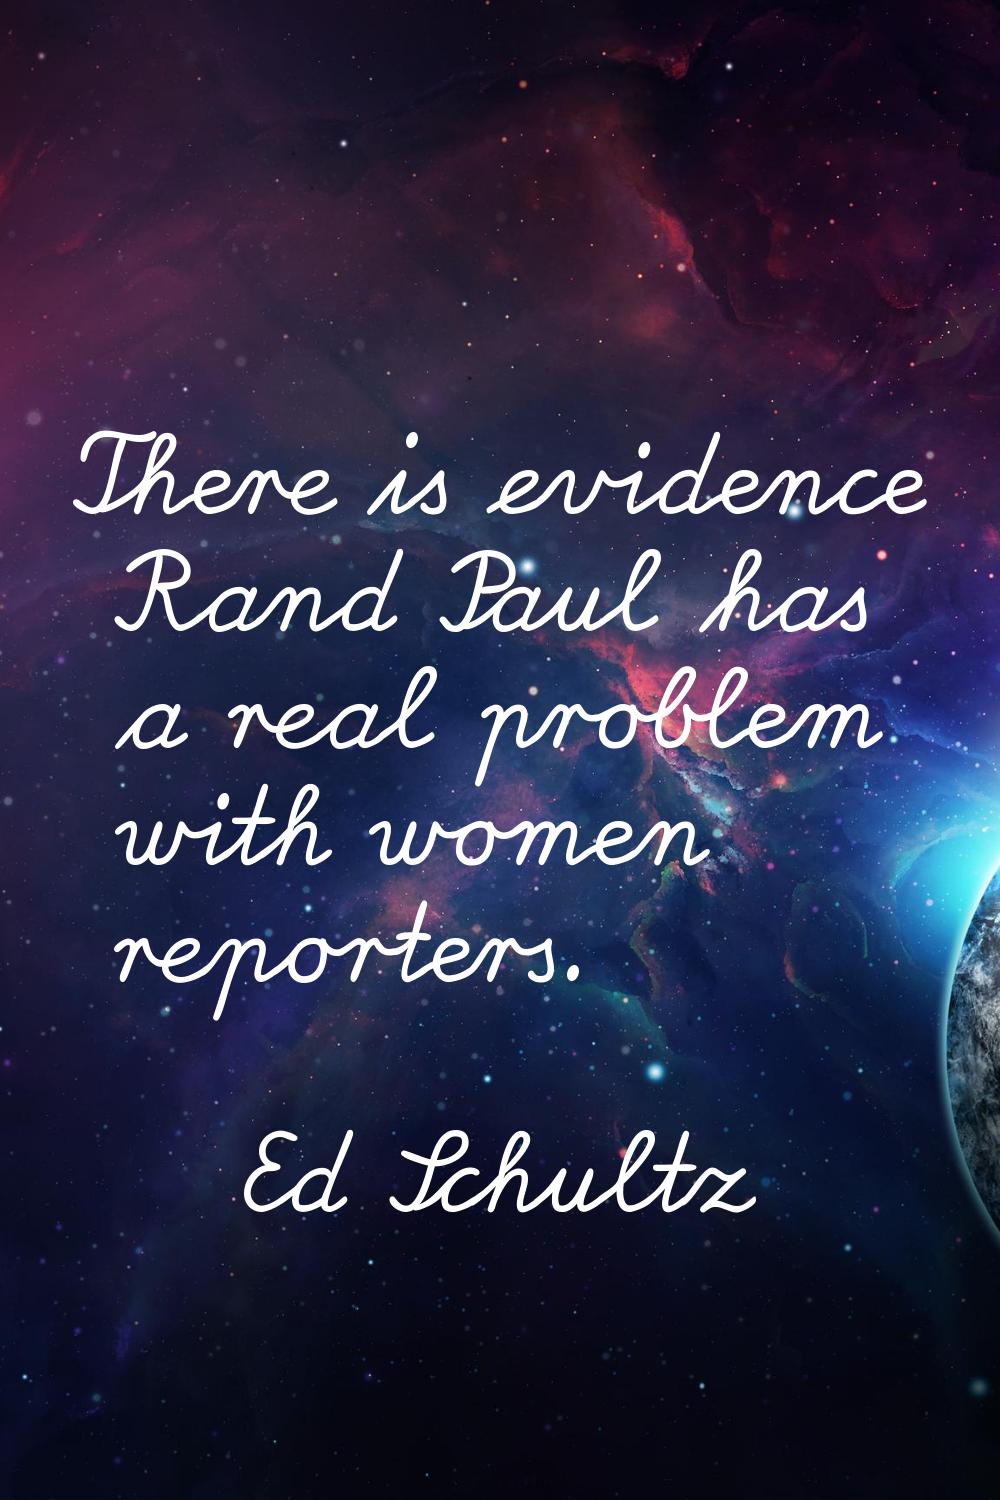 There is evidence Rand Paul has a real problem with women reporters.